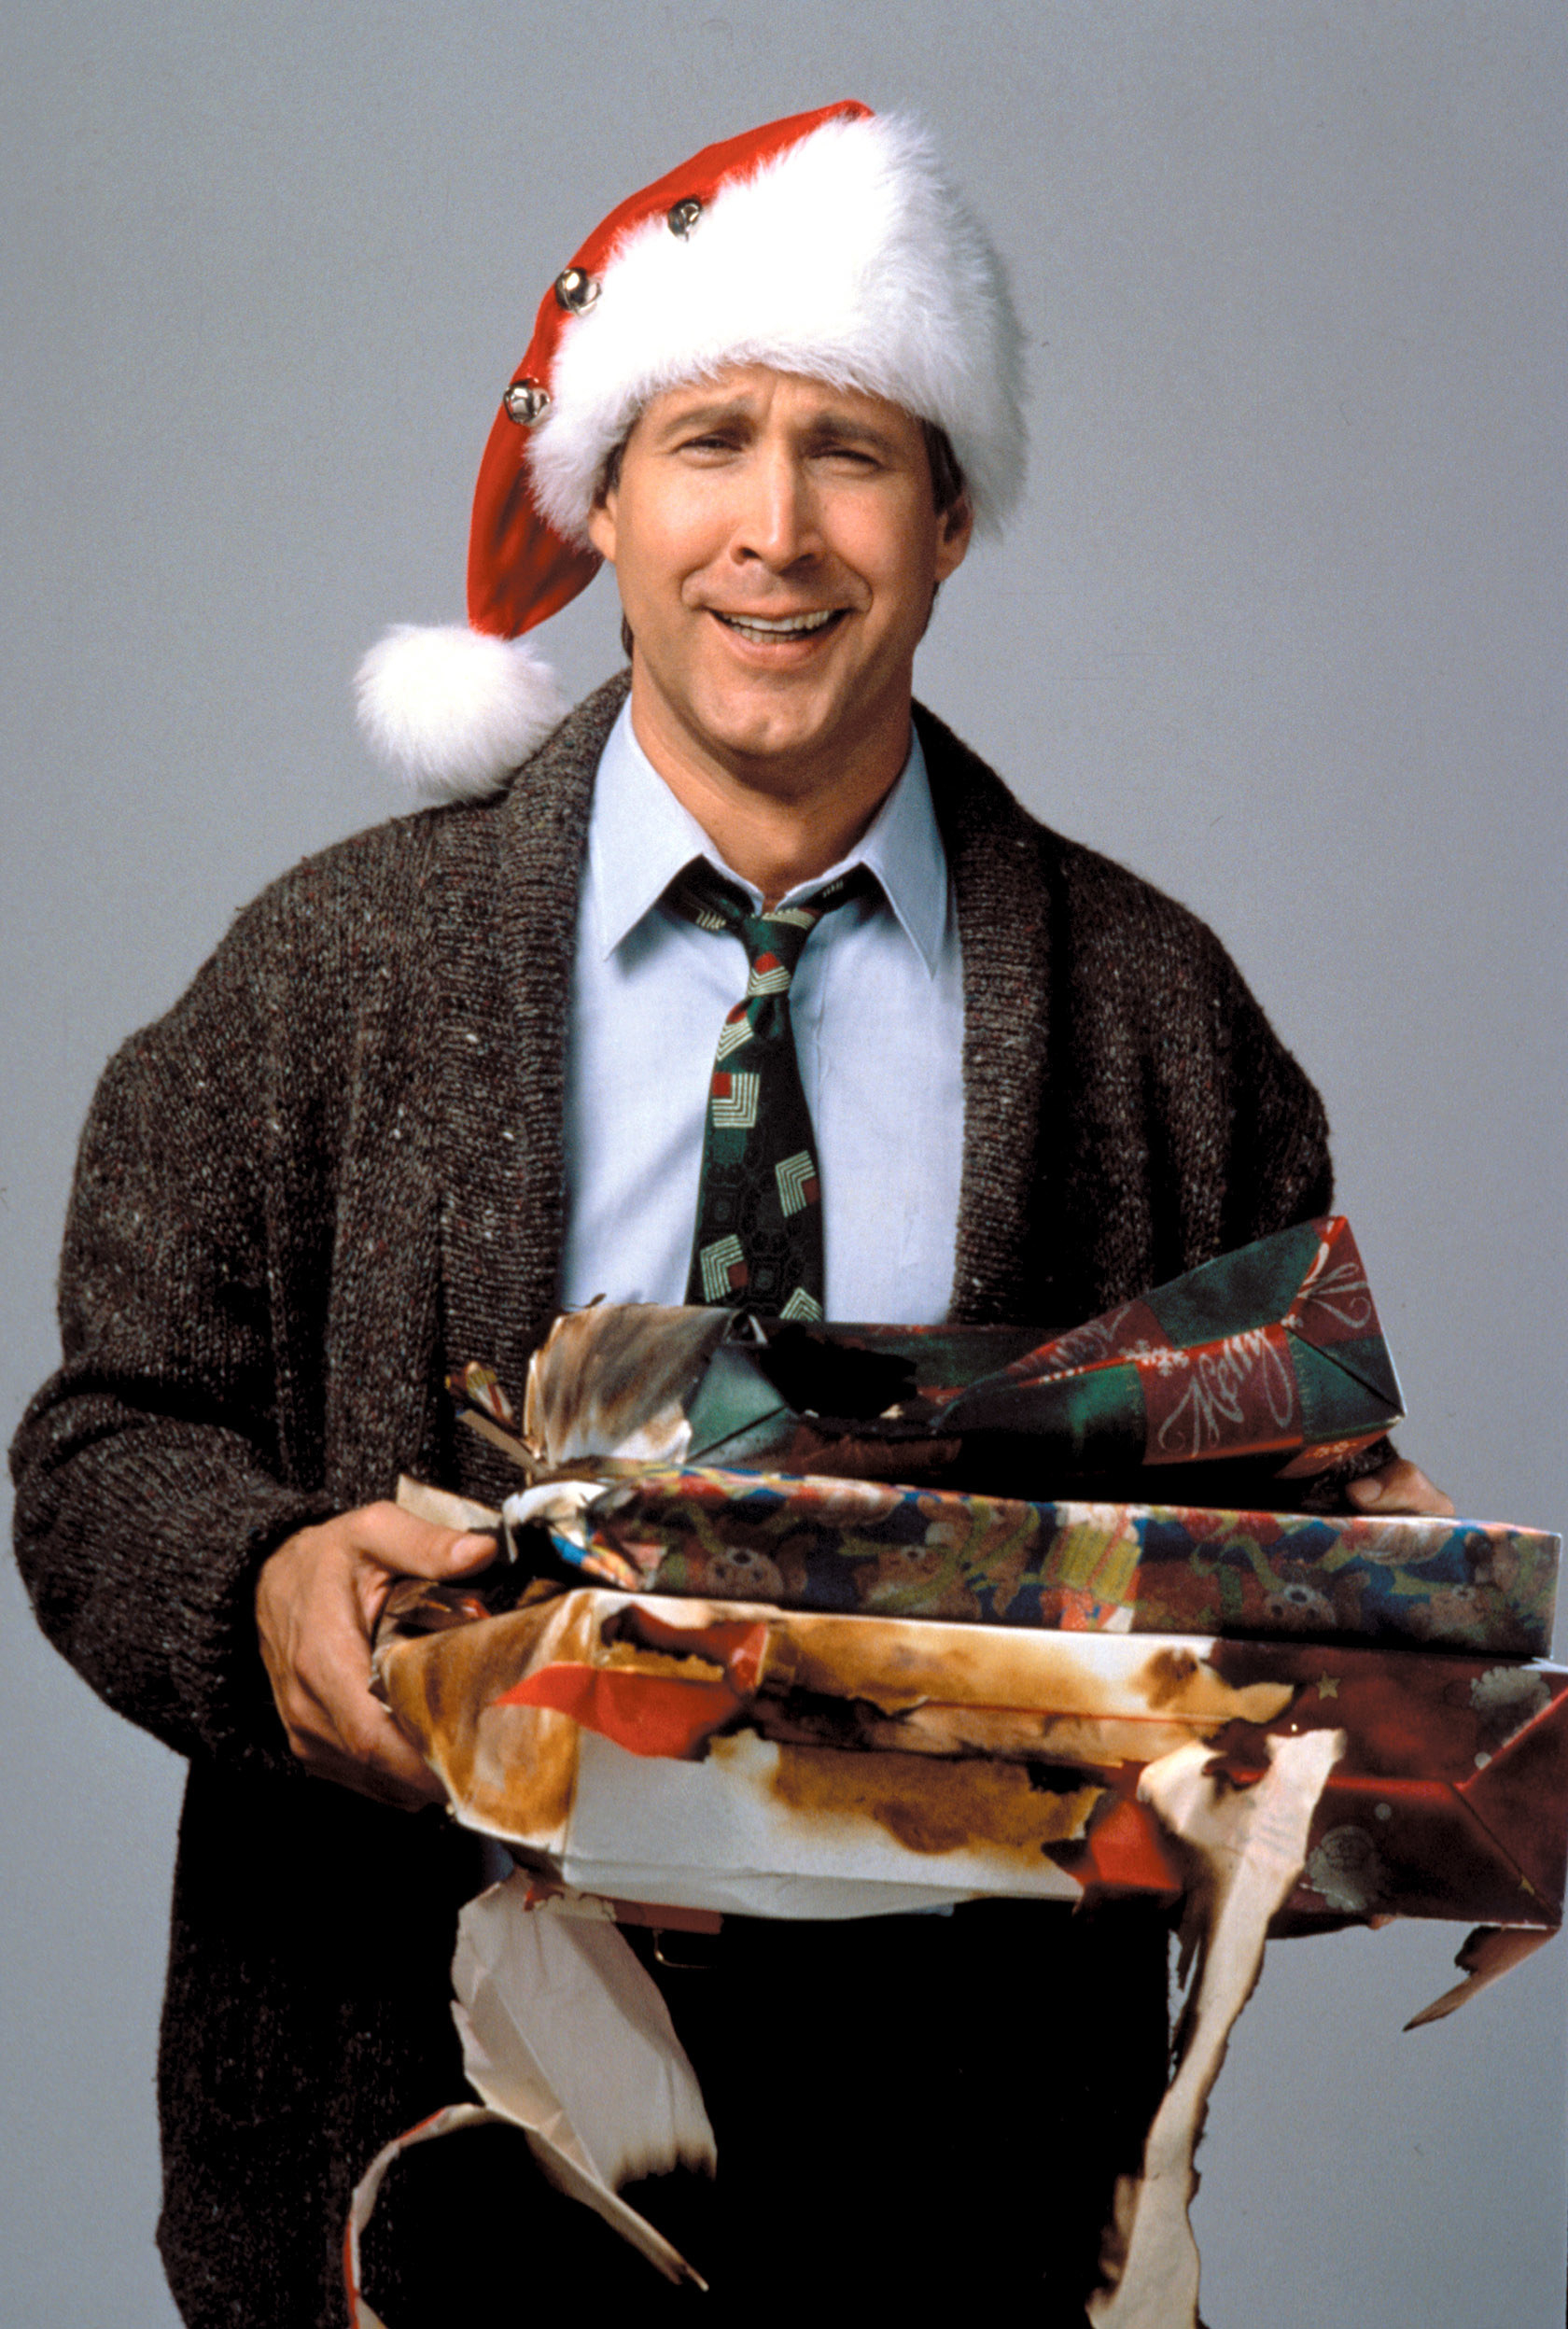 Chevy Chase holding burnt Christmas presents